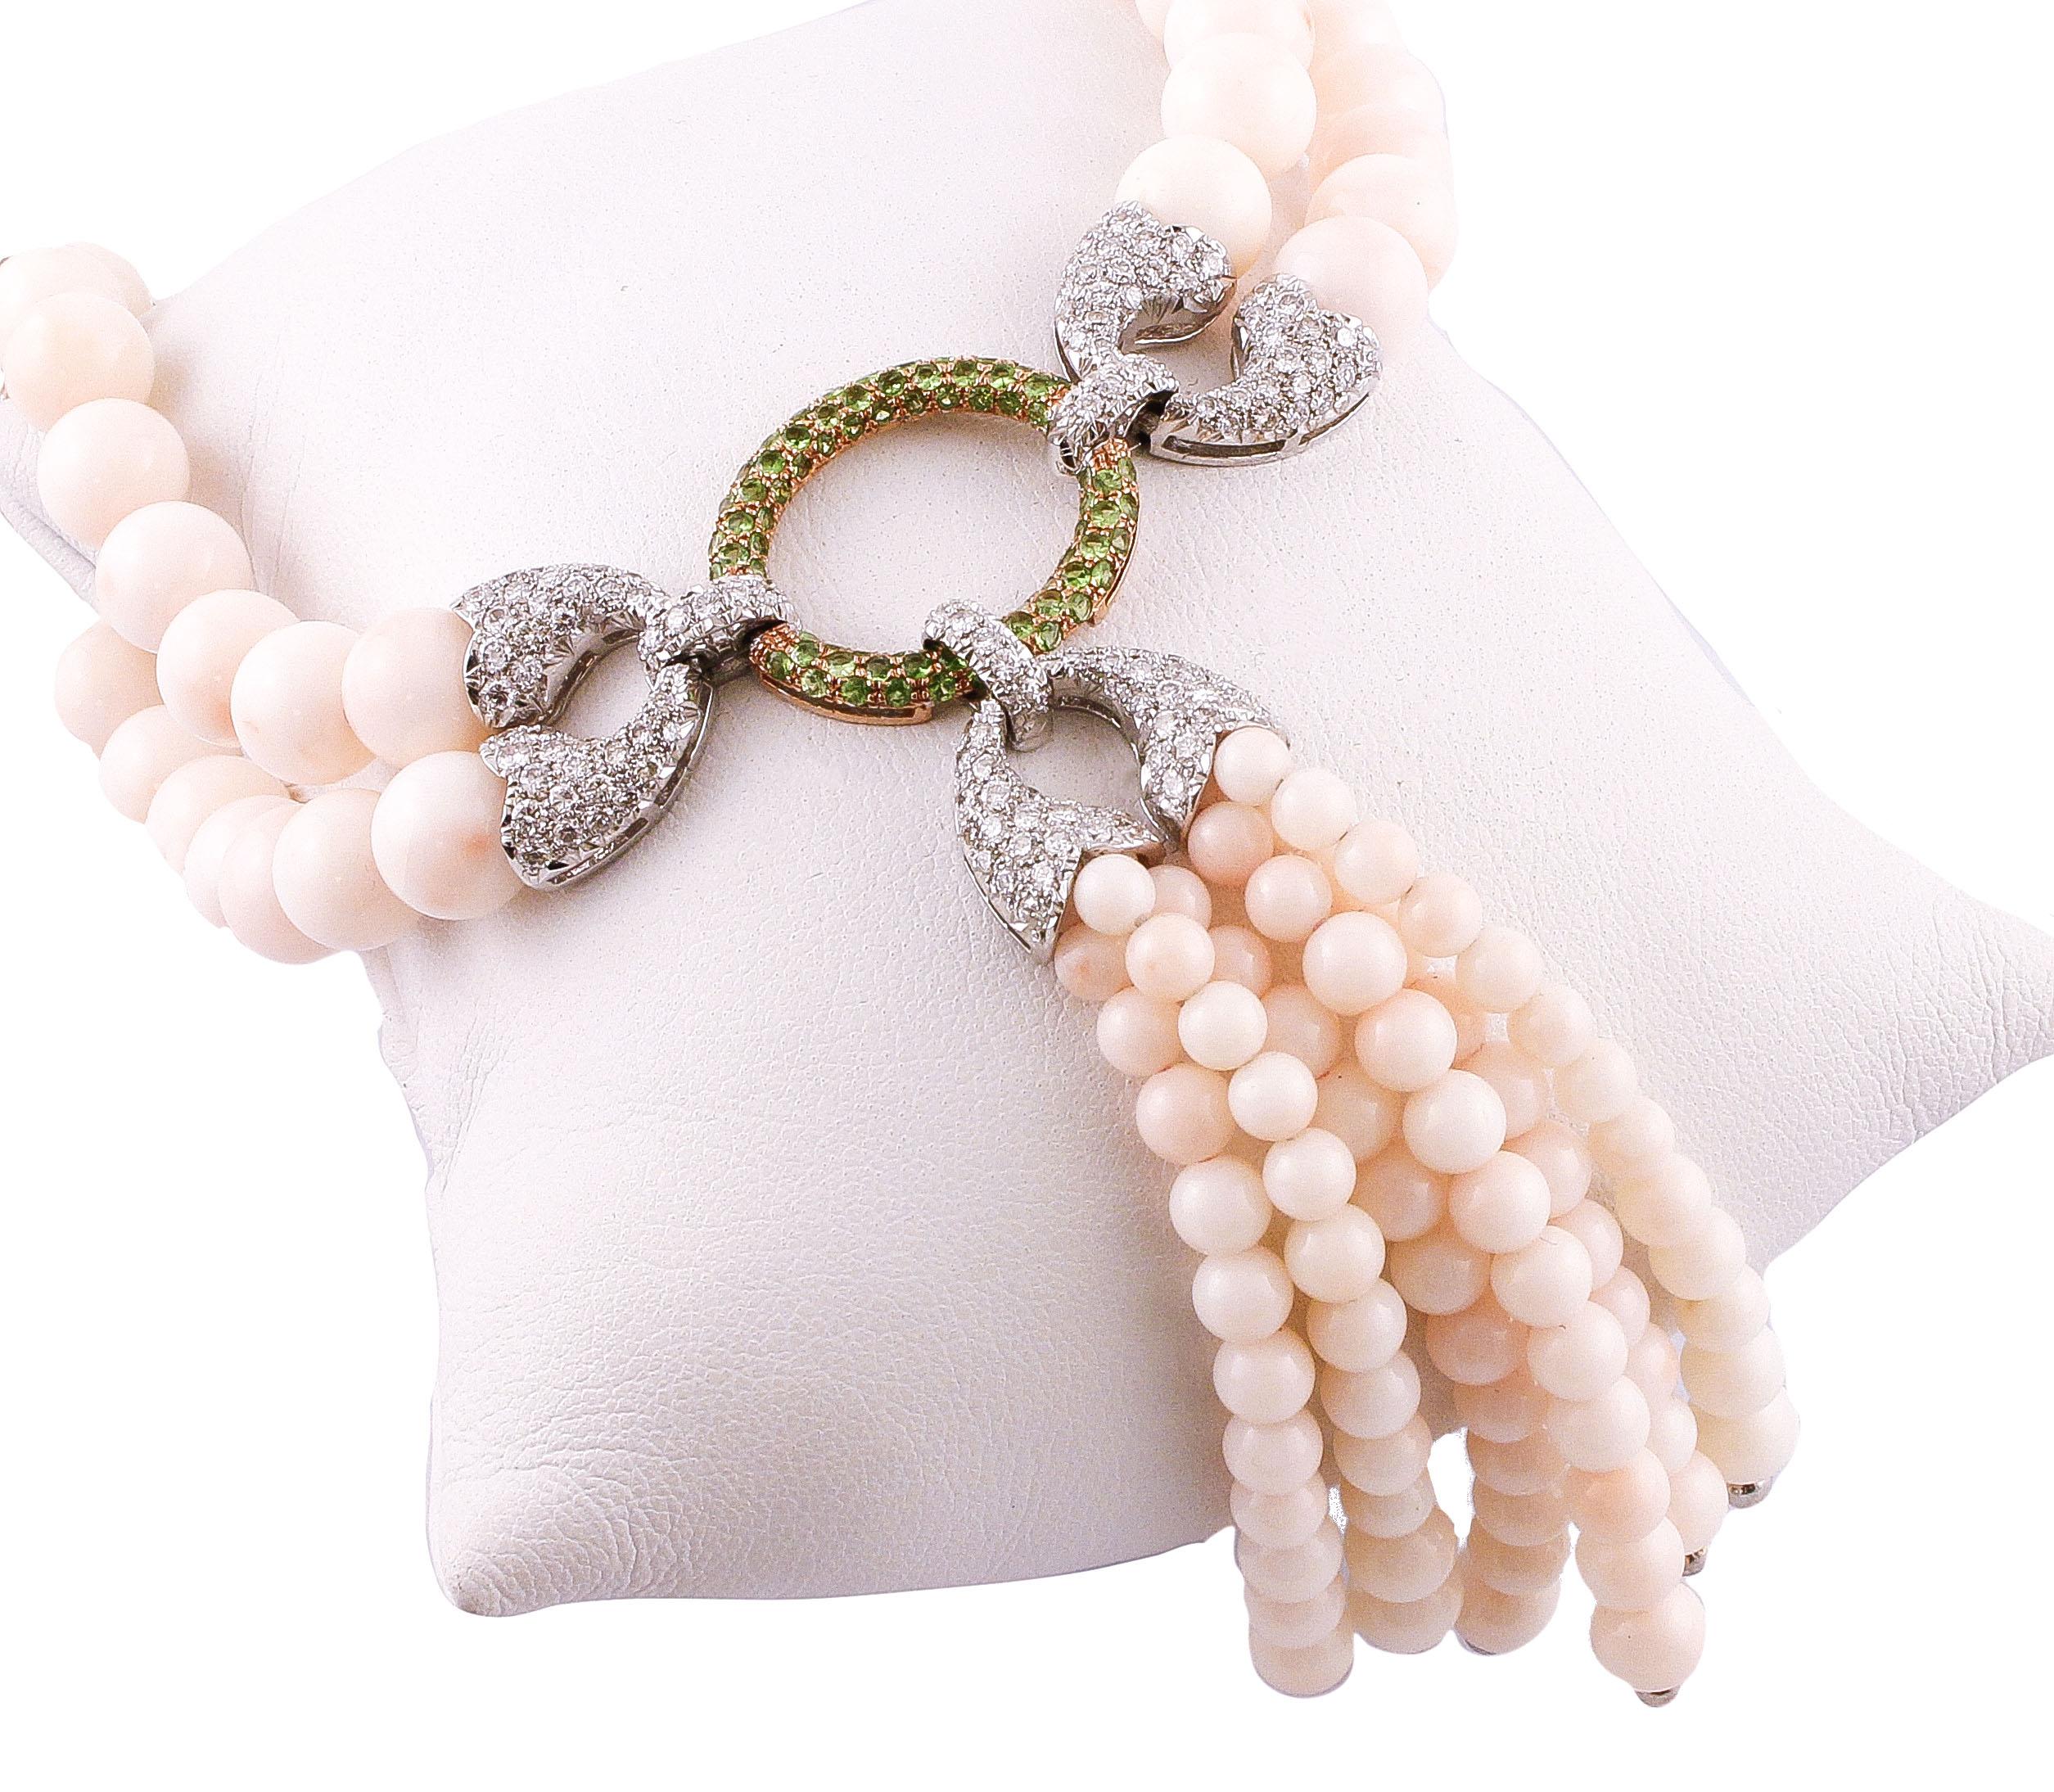 Brilliant Cut Diamonds, Tsavorites, Pink Coral Spheres, White and Rose Gold Beaded Necklace For Sale